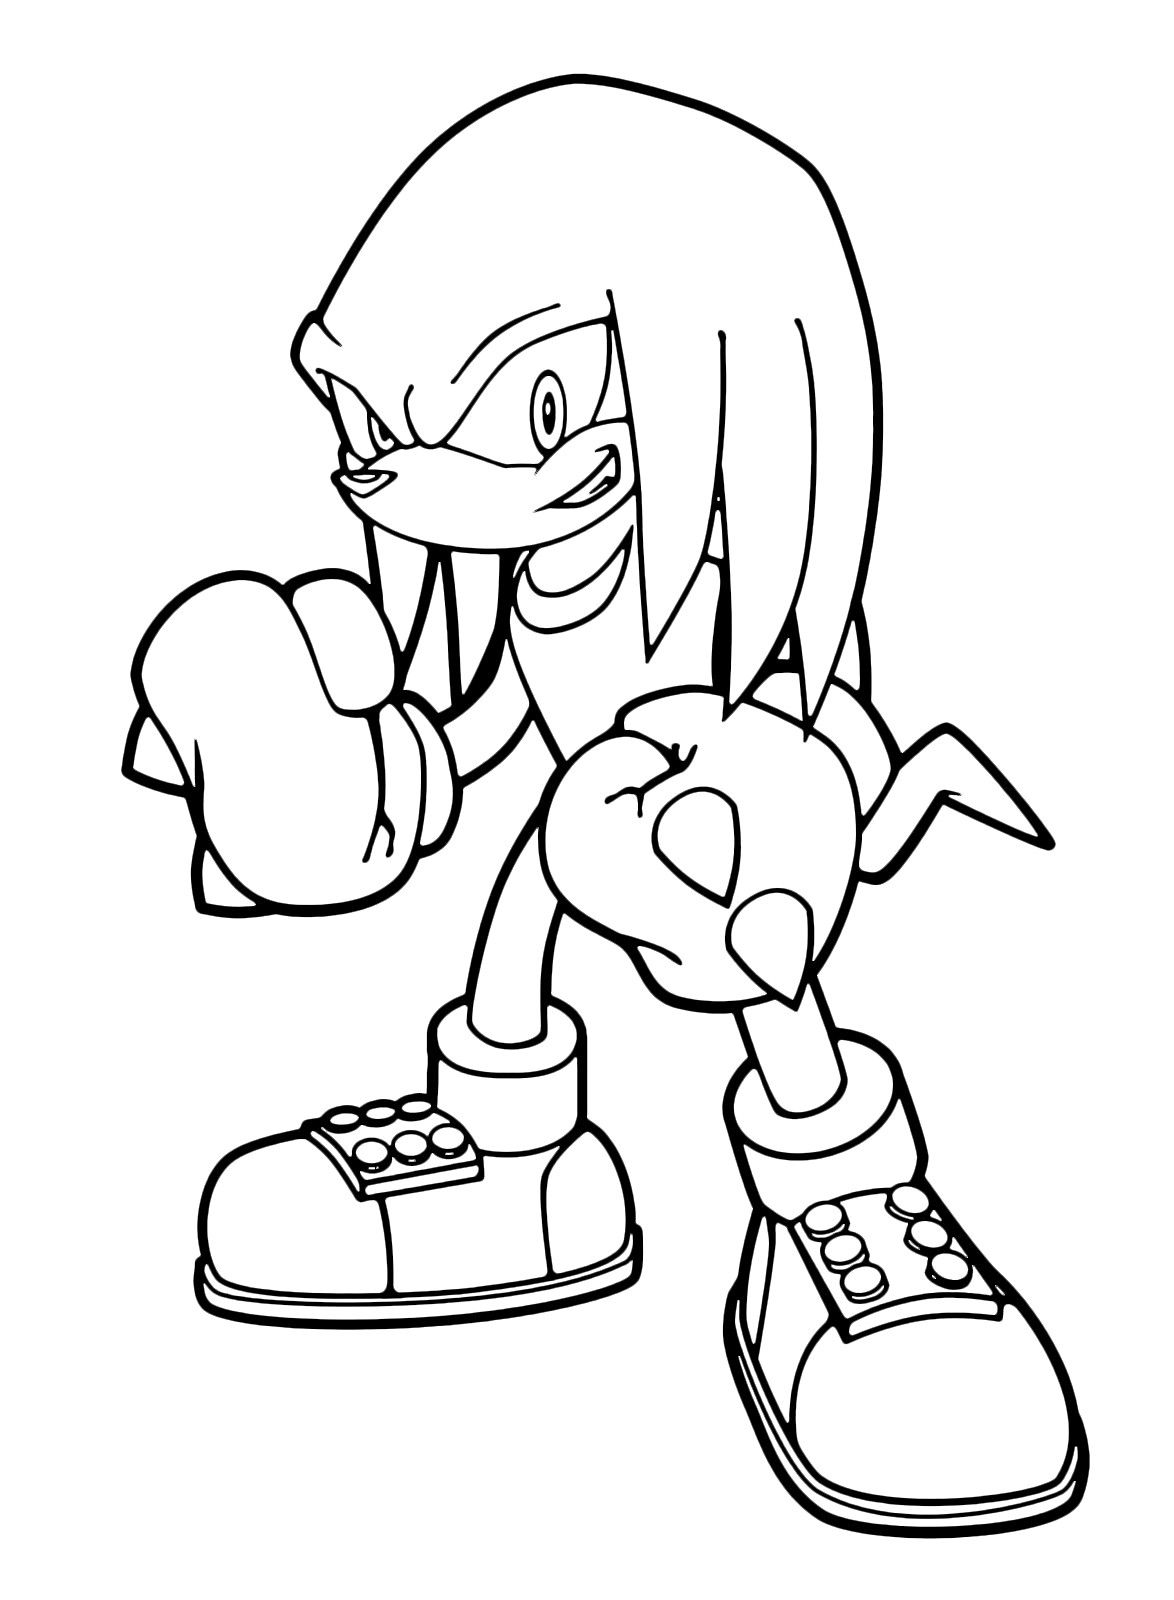 Printable Knuckles Coloring Pages - knuckles coloring pages